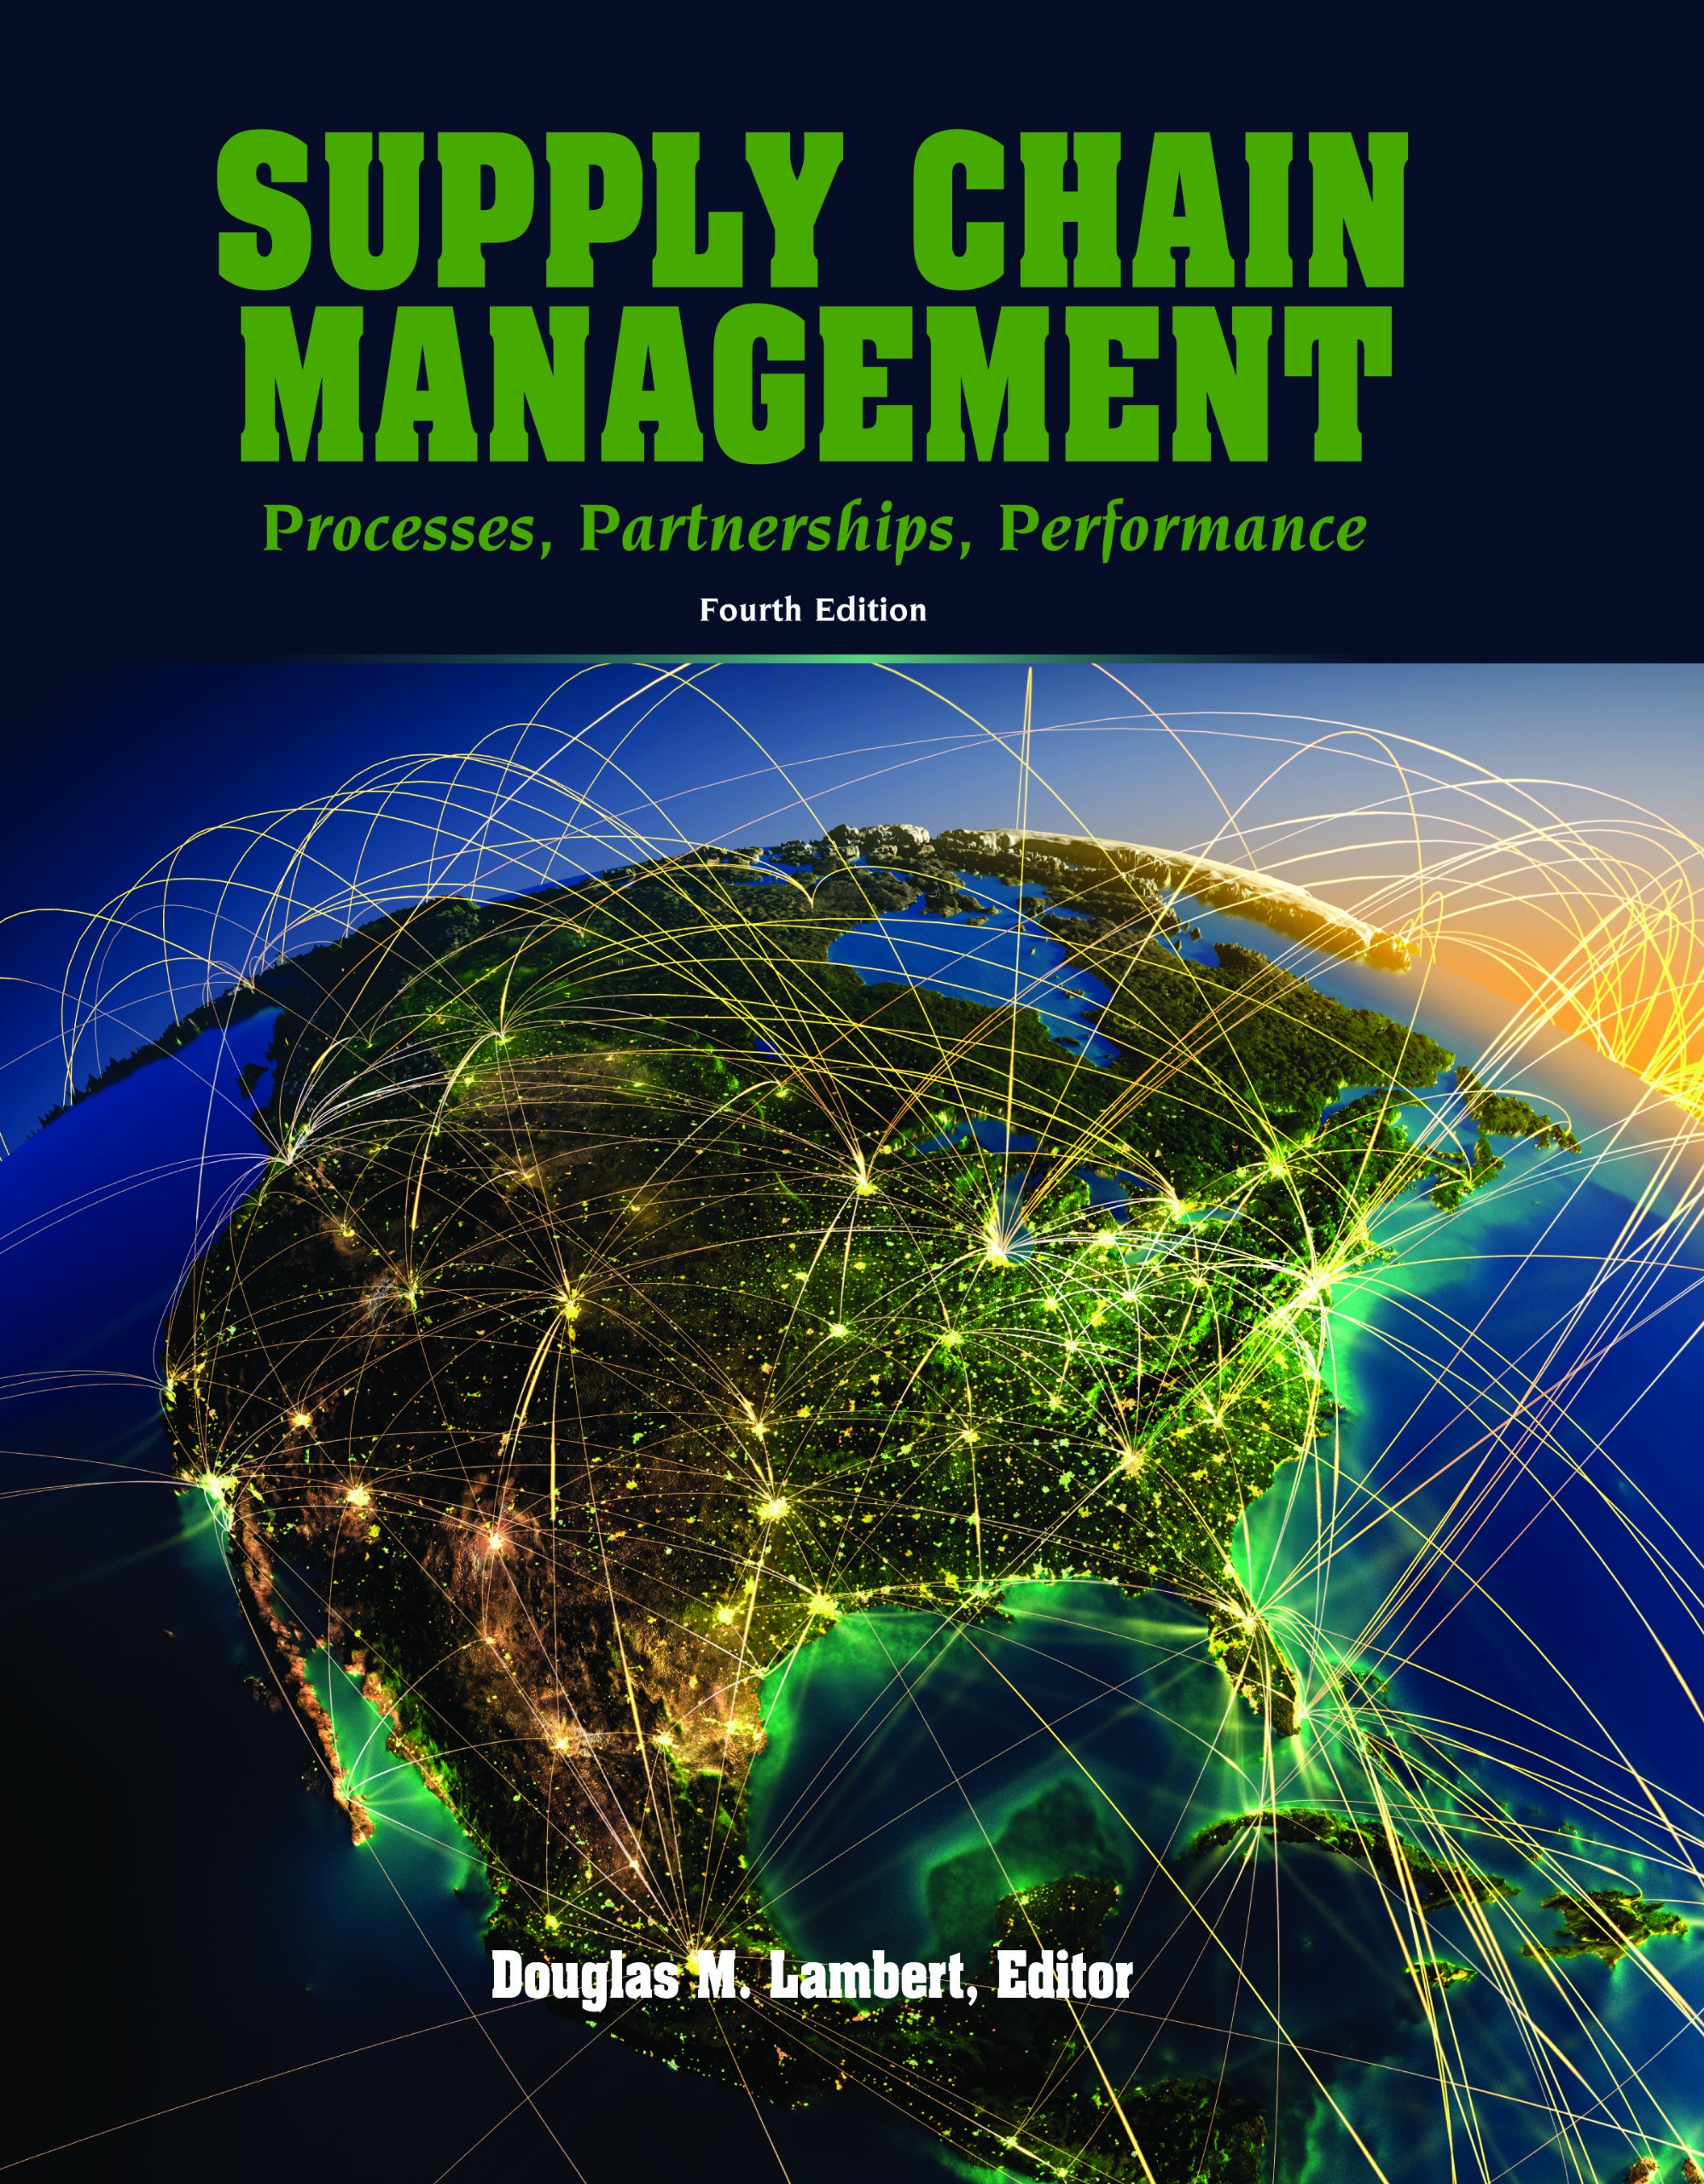 Supply Chain Management: Processes, Partnerships, Performance